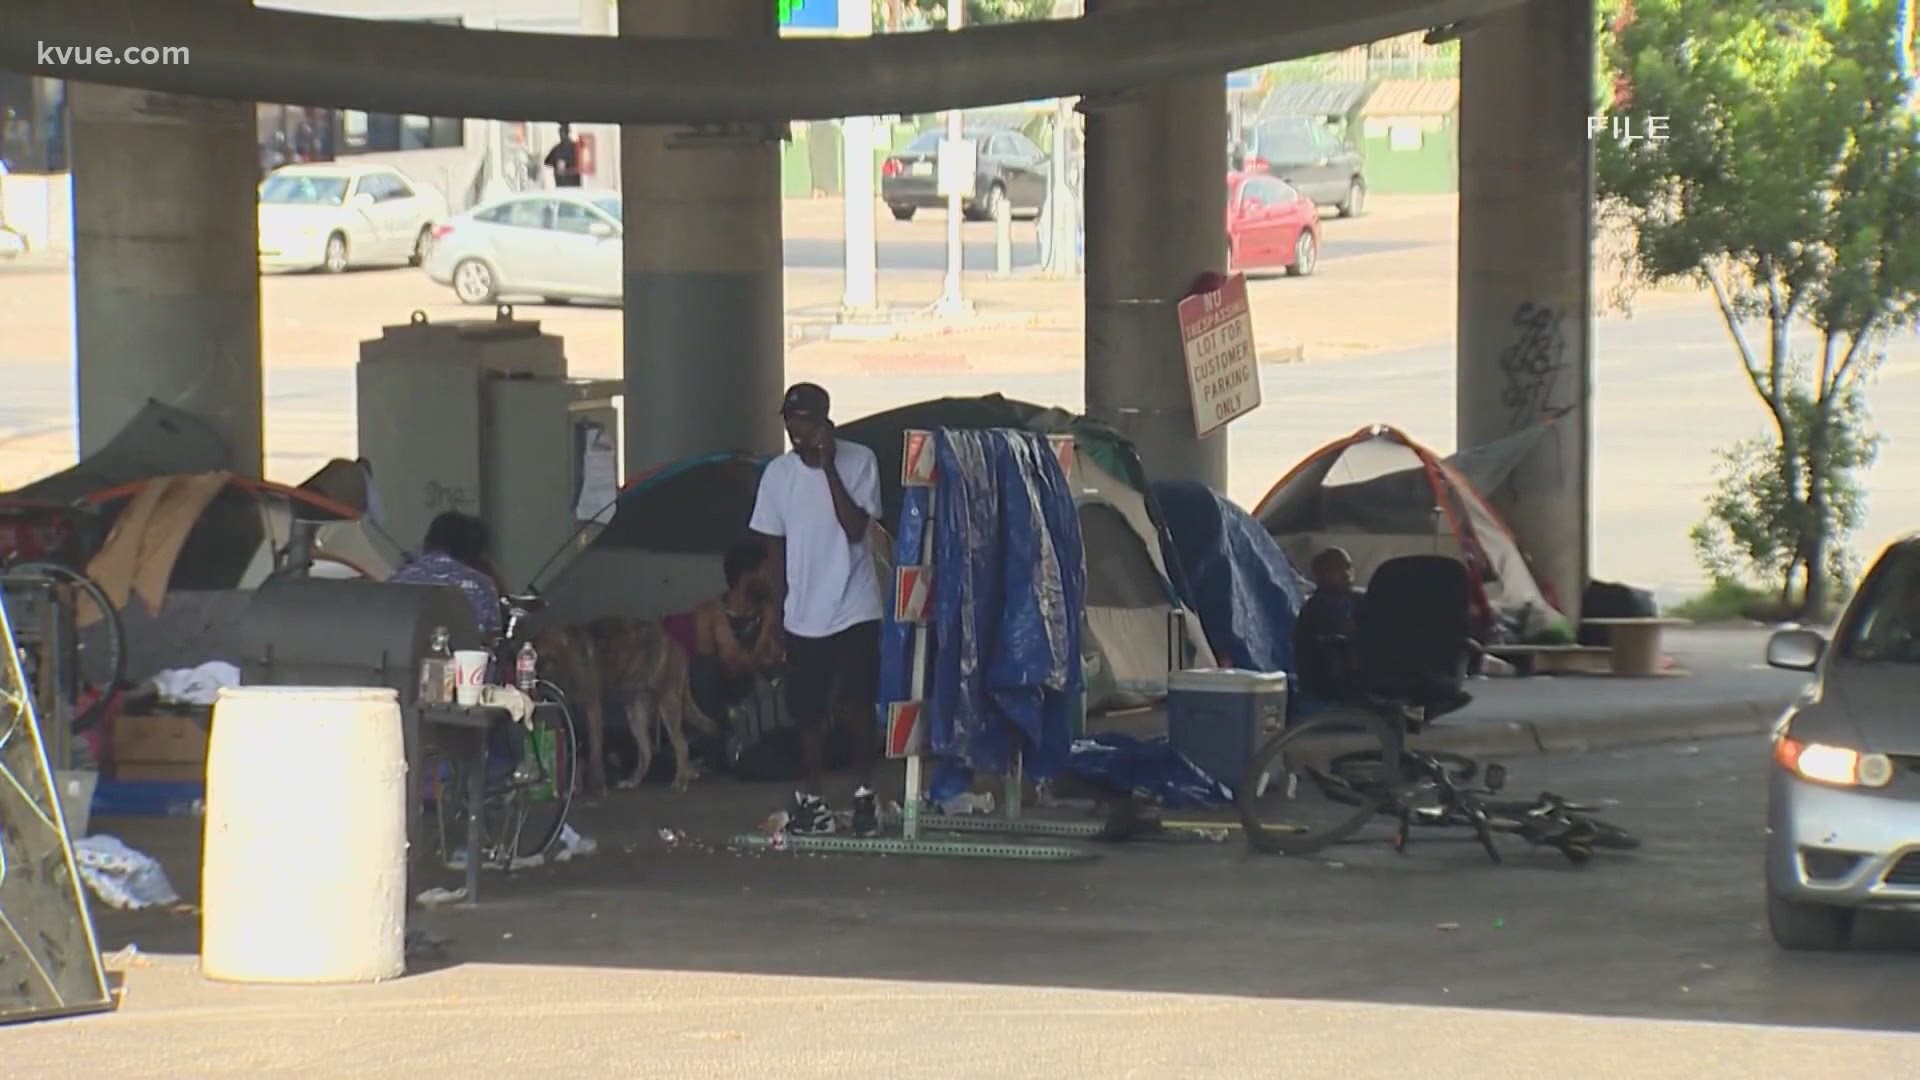 State lawmakers heard hours of testimony both for and against the bills that would criminalize homeless camping in Texas.